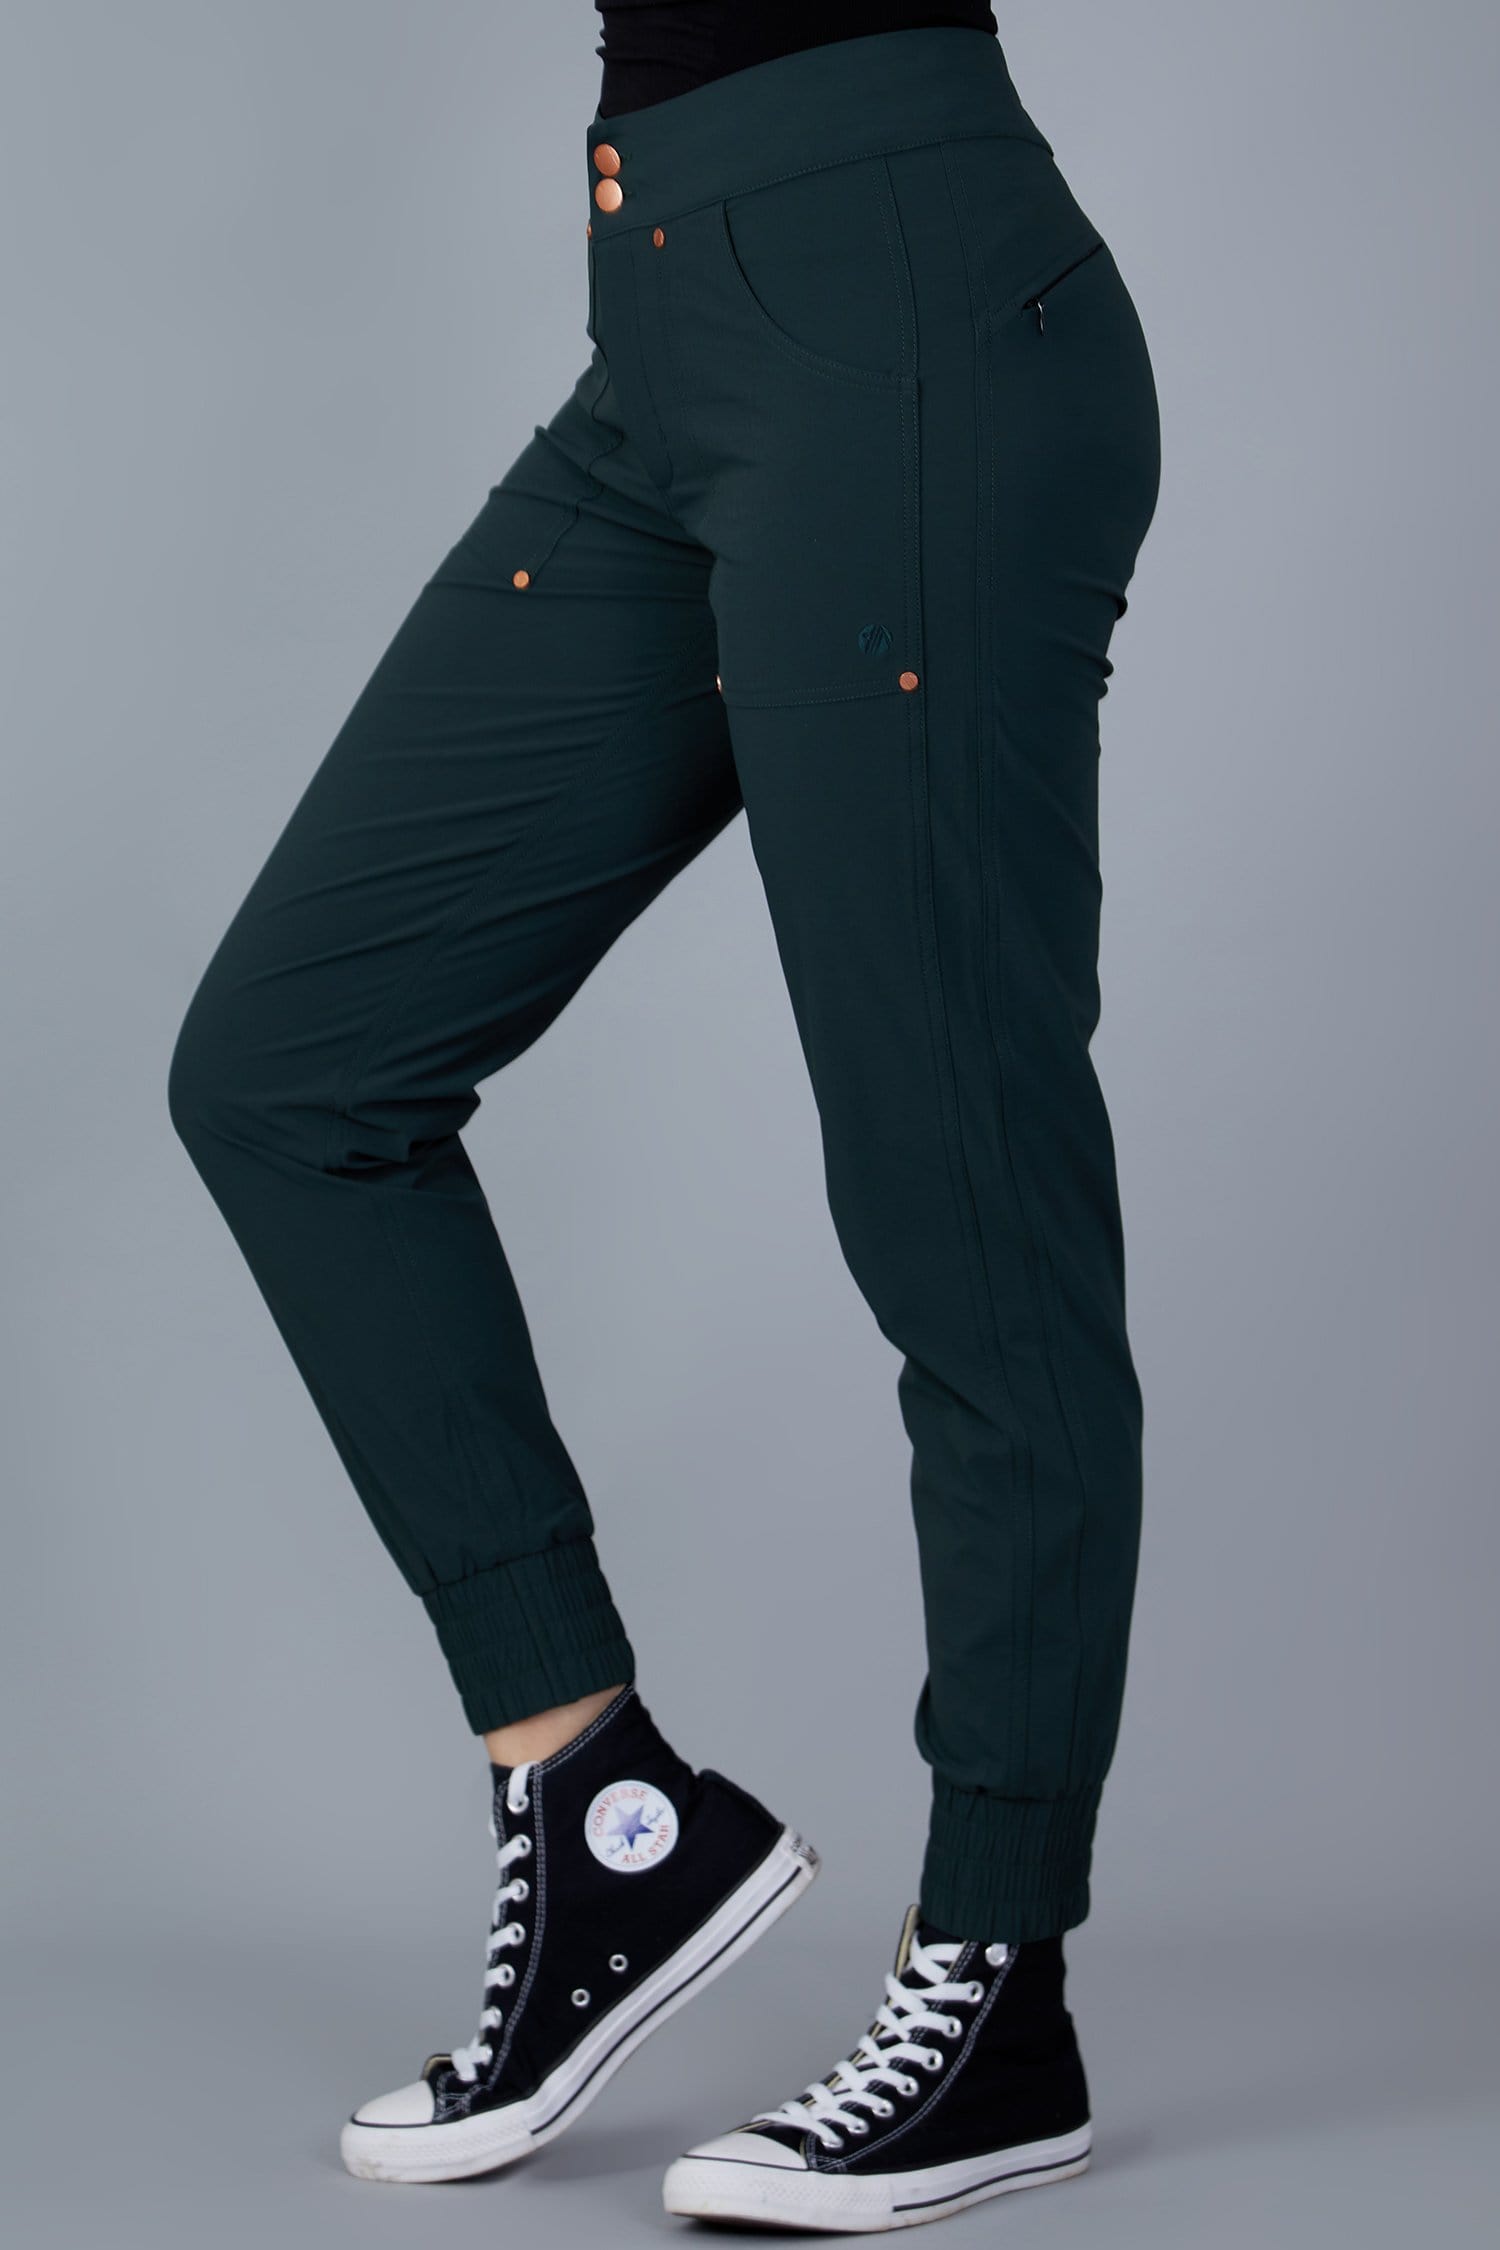 Casual Stroll Pants - Forest Green - 26l / Uk8 - Womens - Acai Outdoorwear